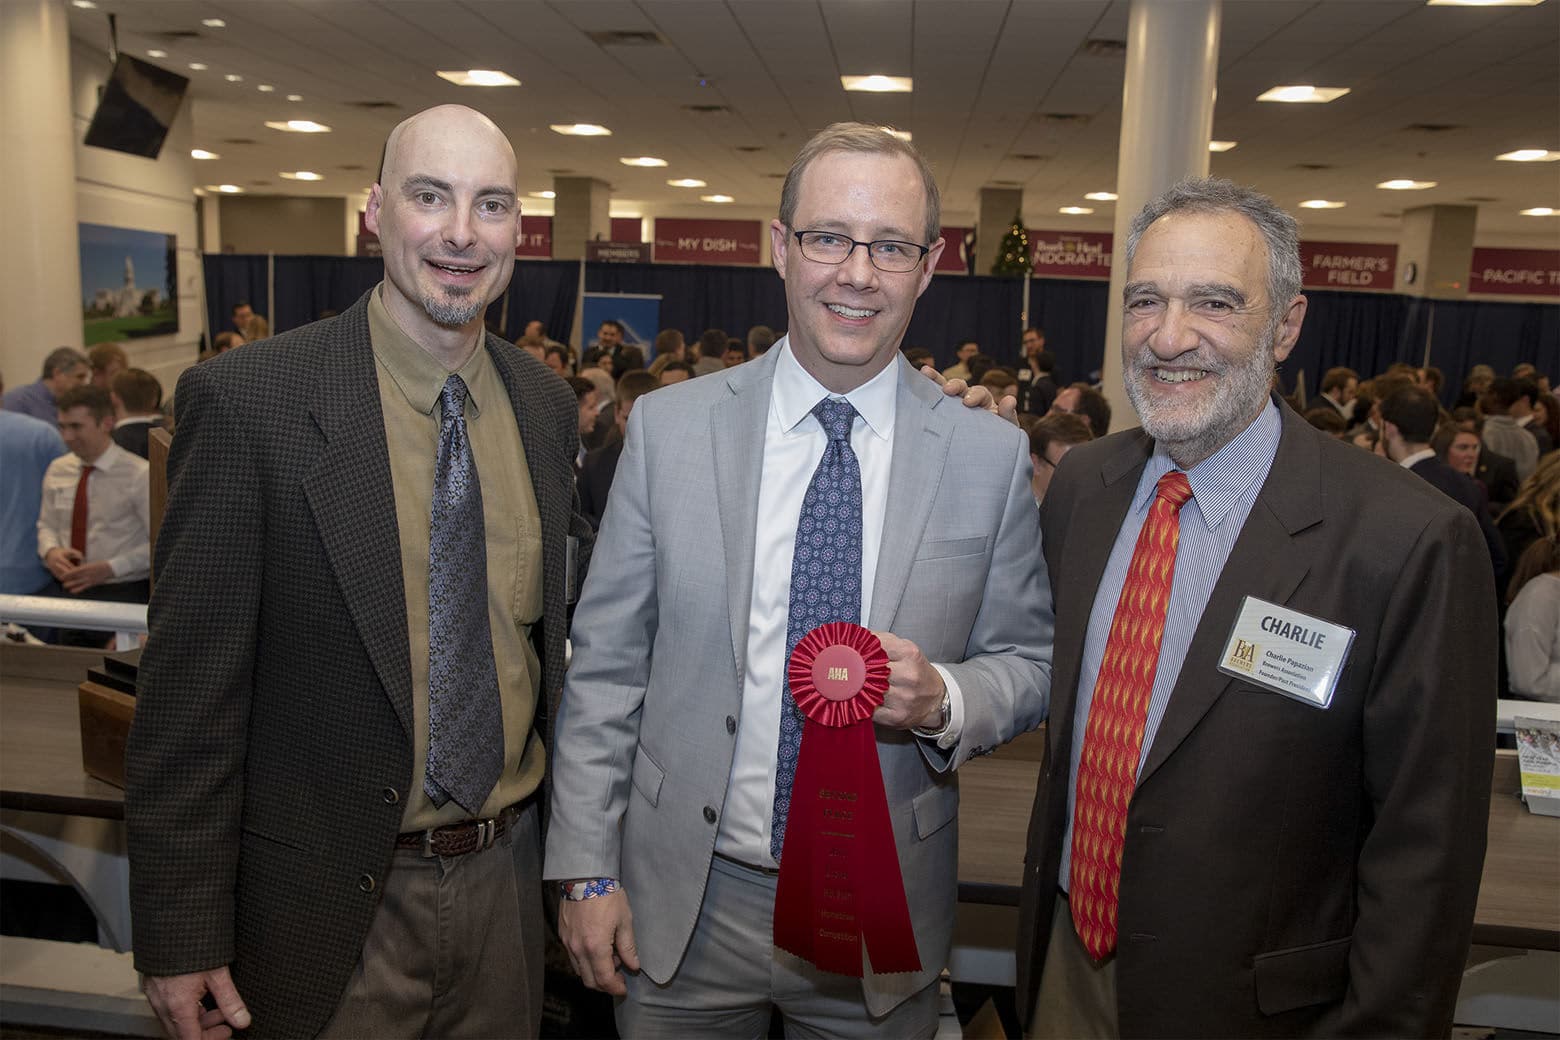 From left: Gary Glass, director of the American Homebrewers Association; Eric Lausten, Office of Rep. Dan Lipinski (D-IL, 3rd District); Charlie Papazian, founder of the American Homebrewers Association. (Courtesy American Homebrewers Association)